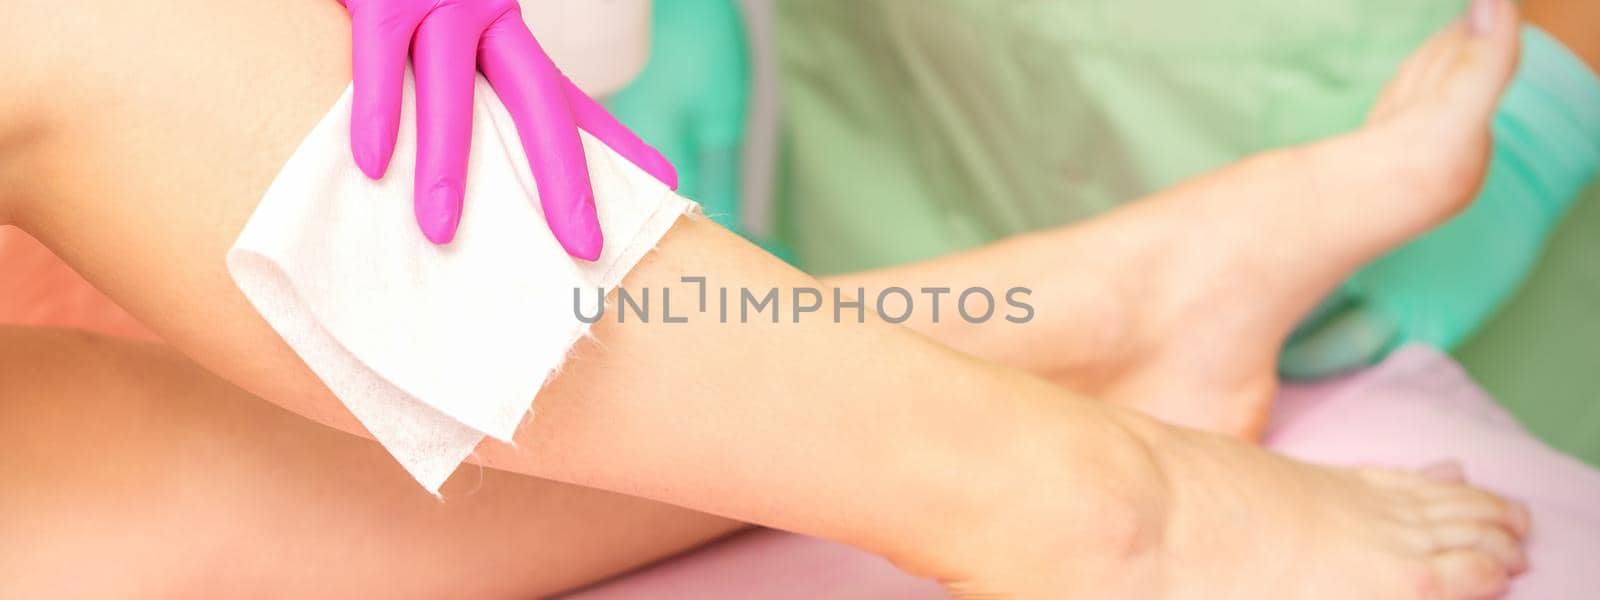 Master of depilation wipes female feet with white napkin preparing for the procedure of hair removal